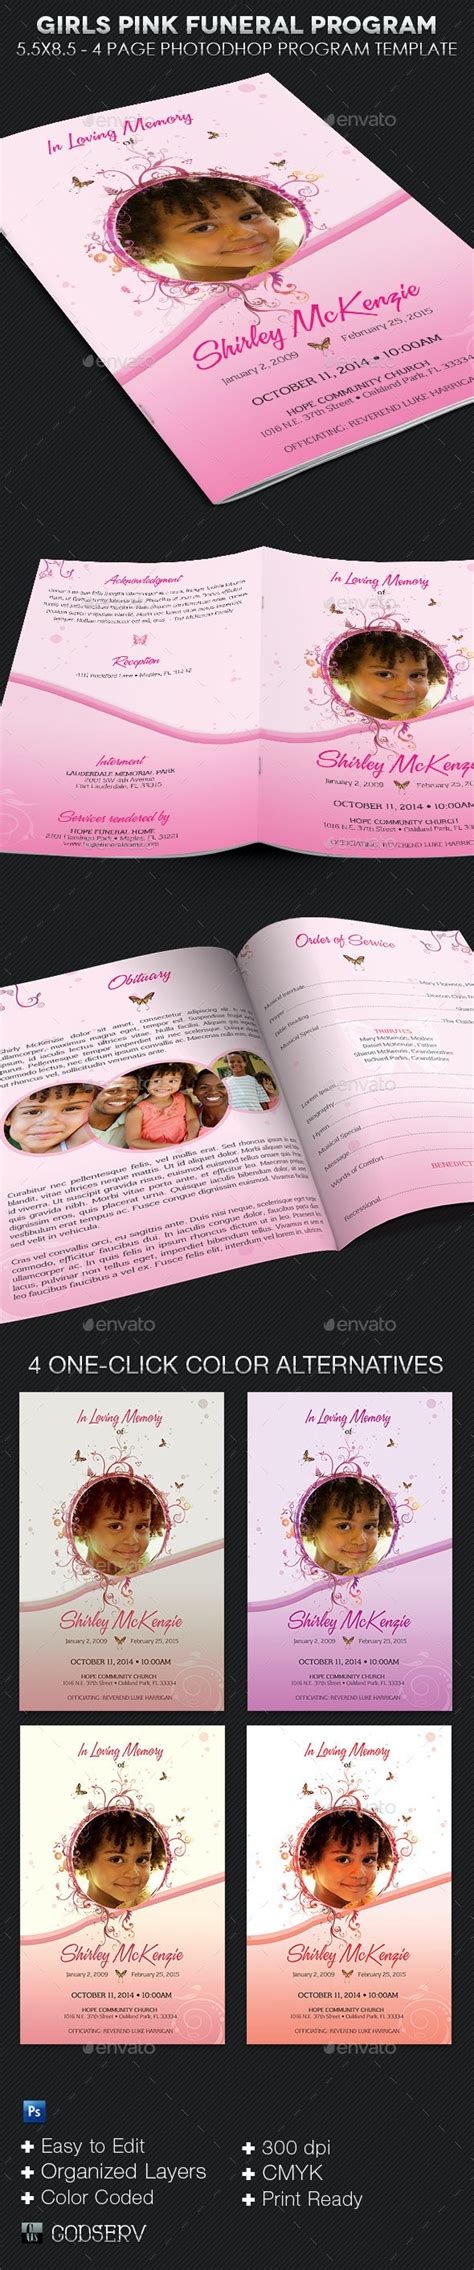 Girls Pink Funeral Program Template By Godserv Graphicriver